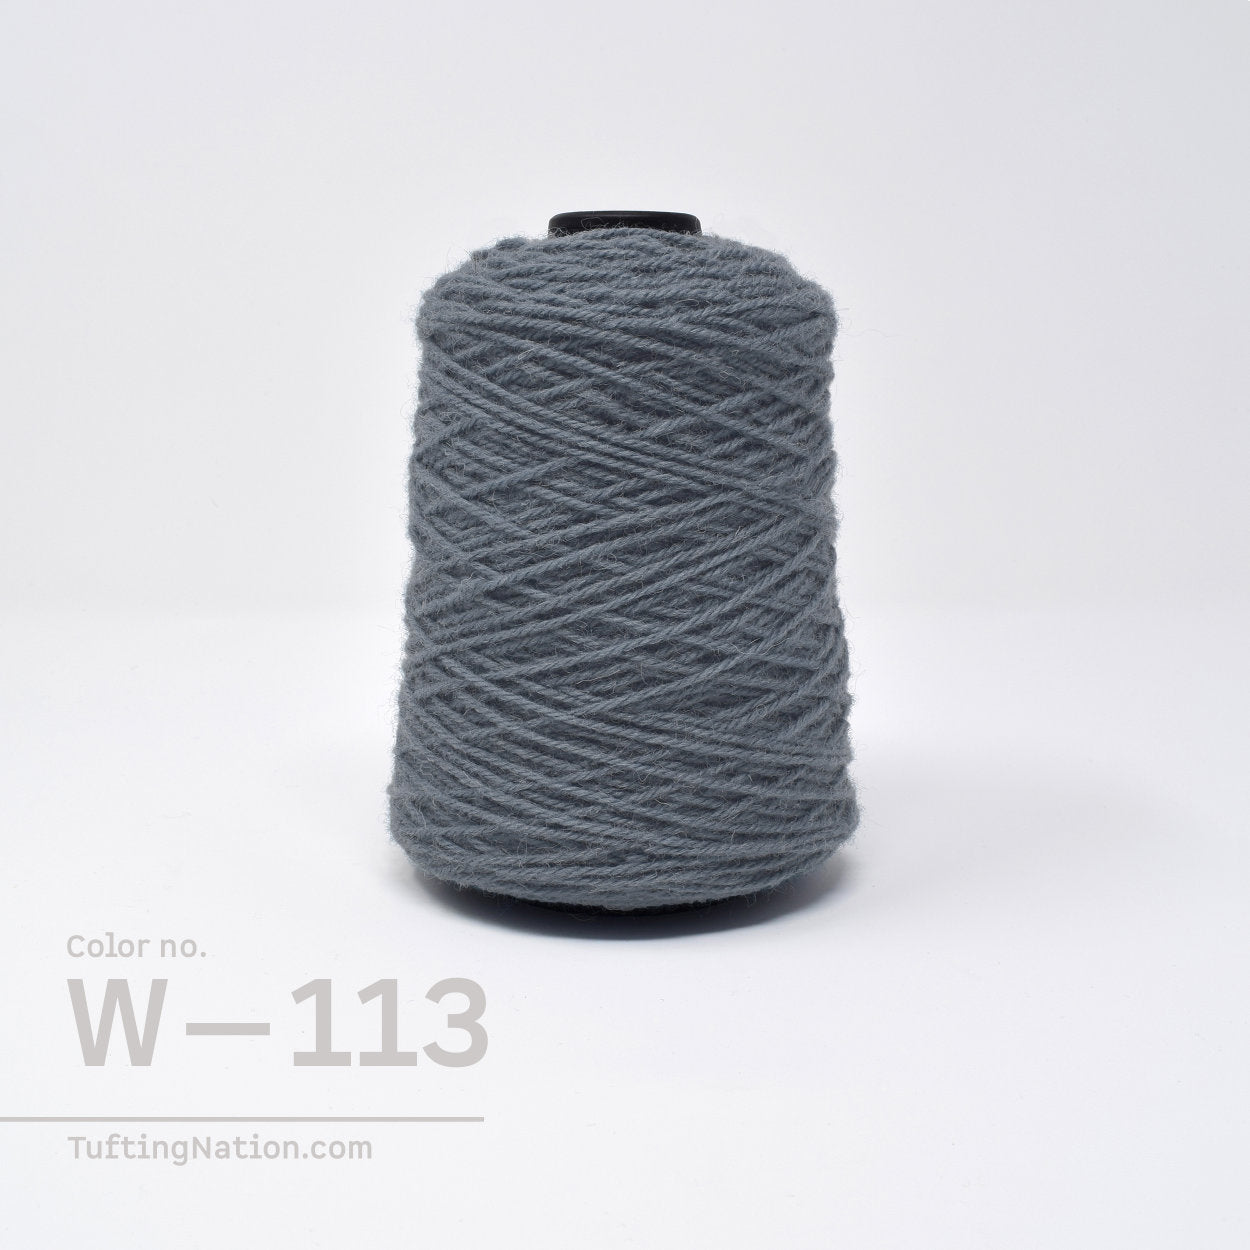 Blue Gray Rug Yarn used to make Tufted Rug, Woven Rug and Punch Needle Art | TuftingNation